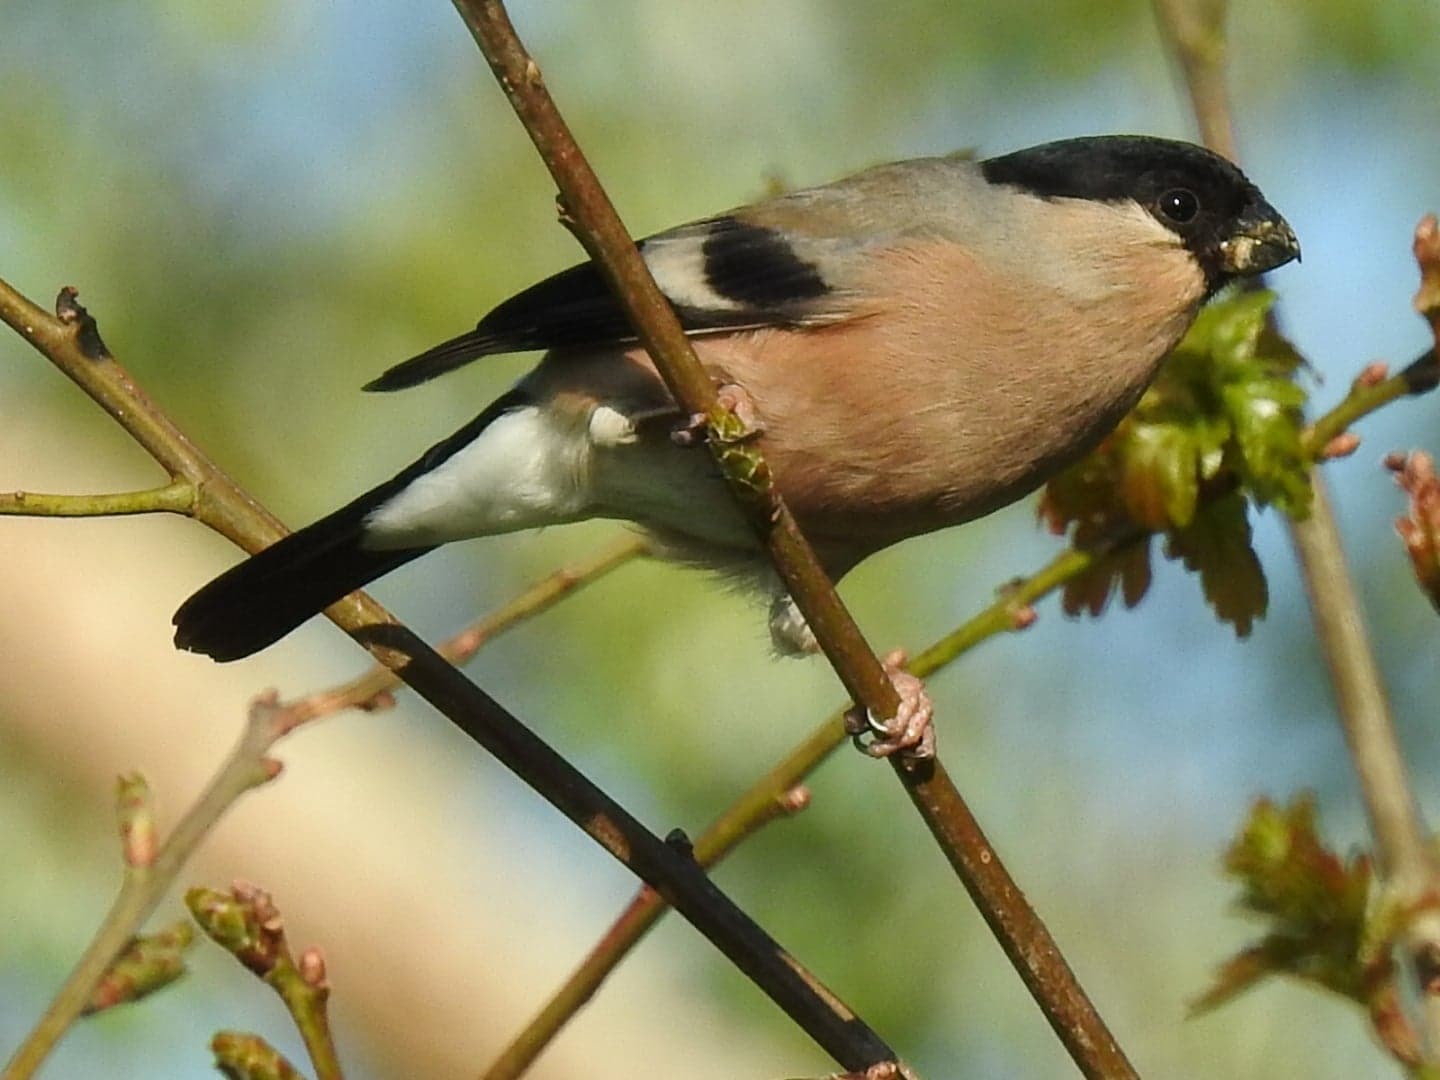 PINKY BROWN: The female bullfinch. The birds remain bonded as a pair for many years